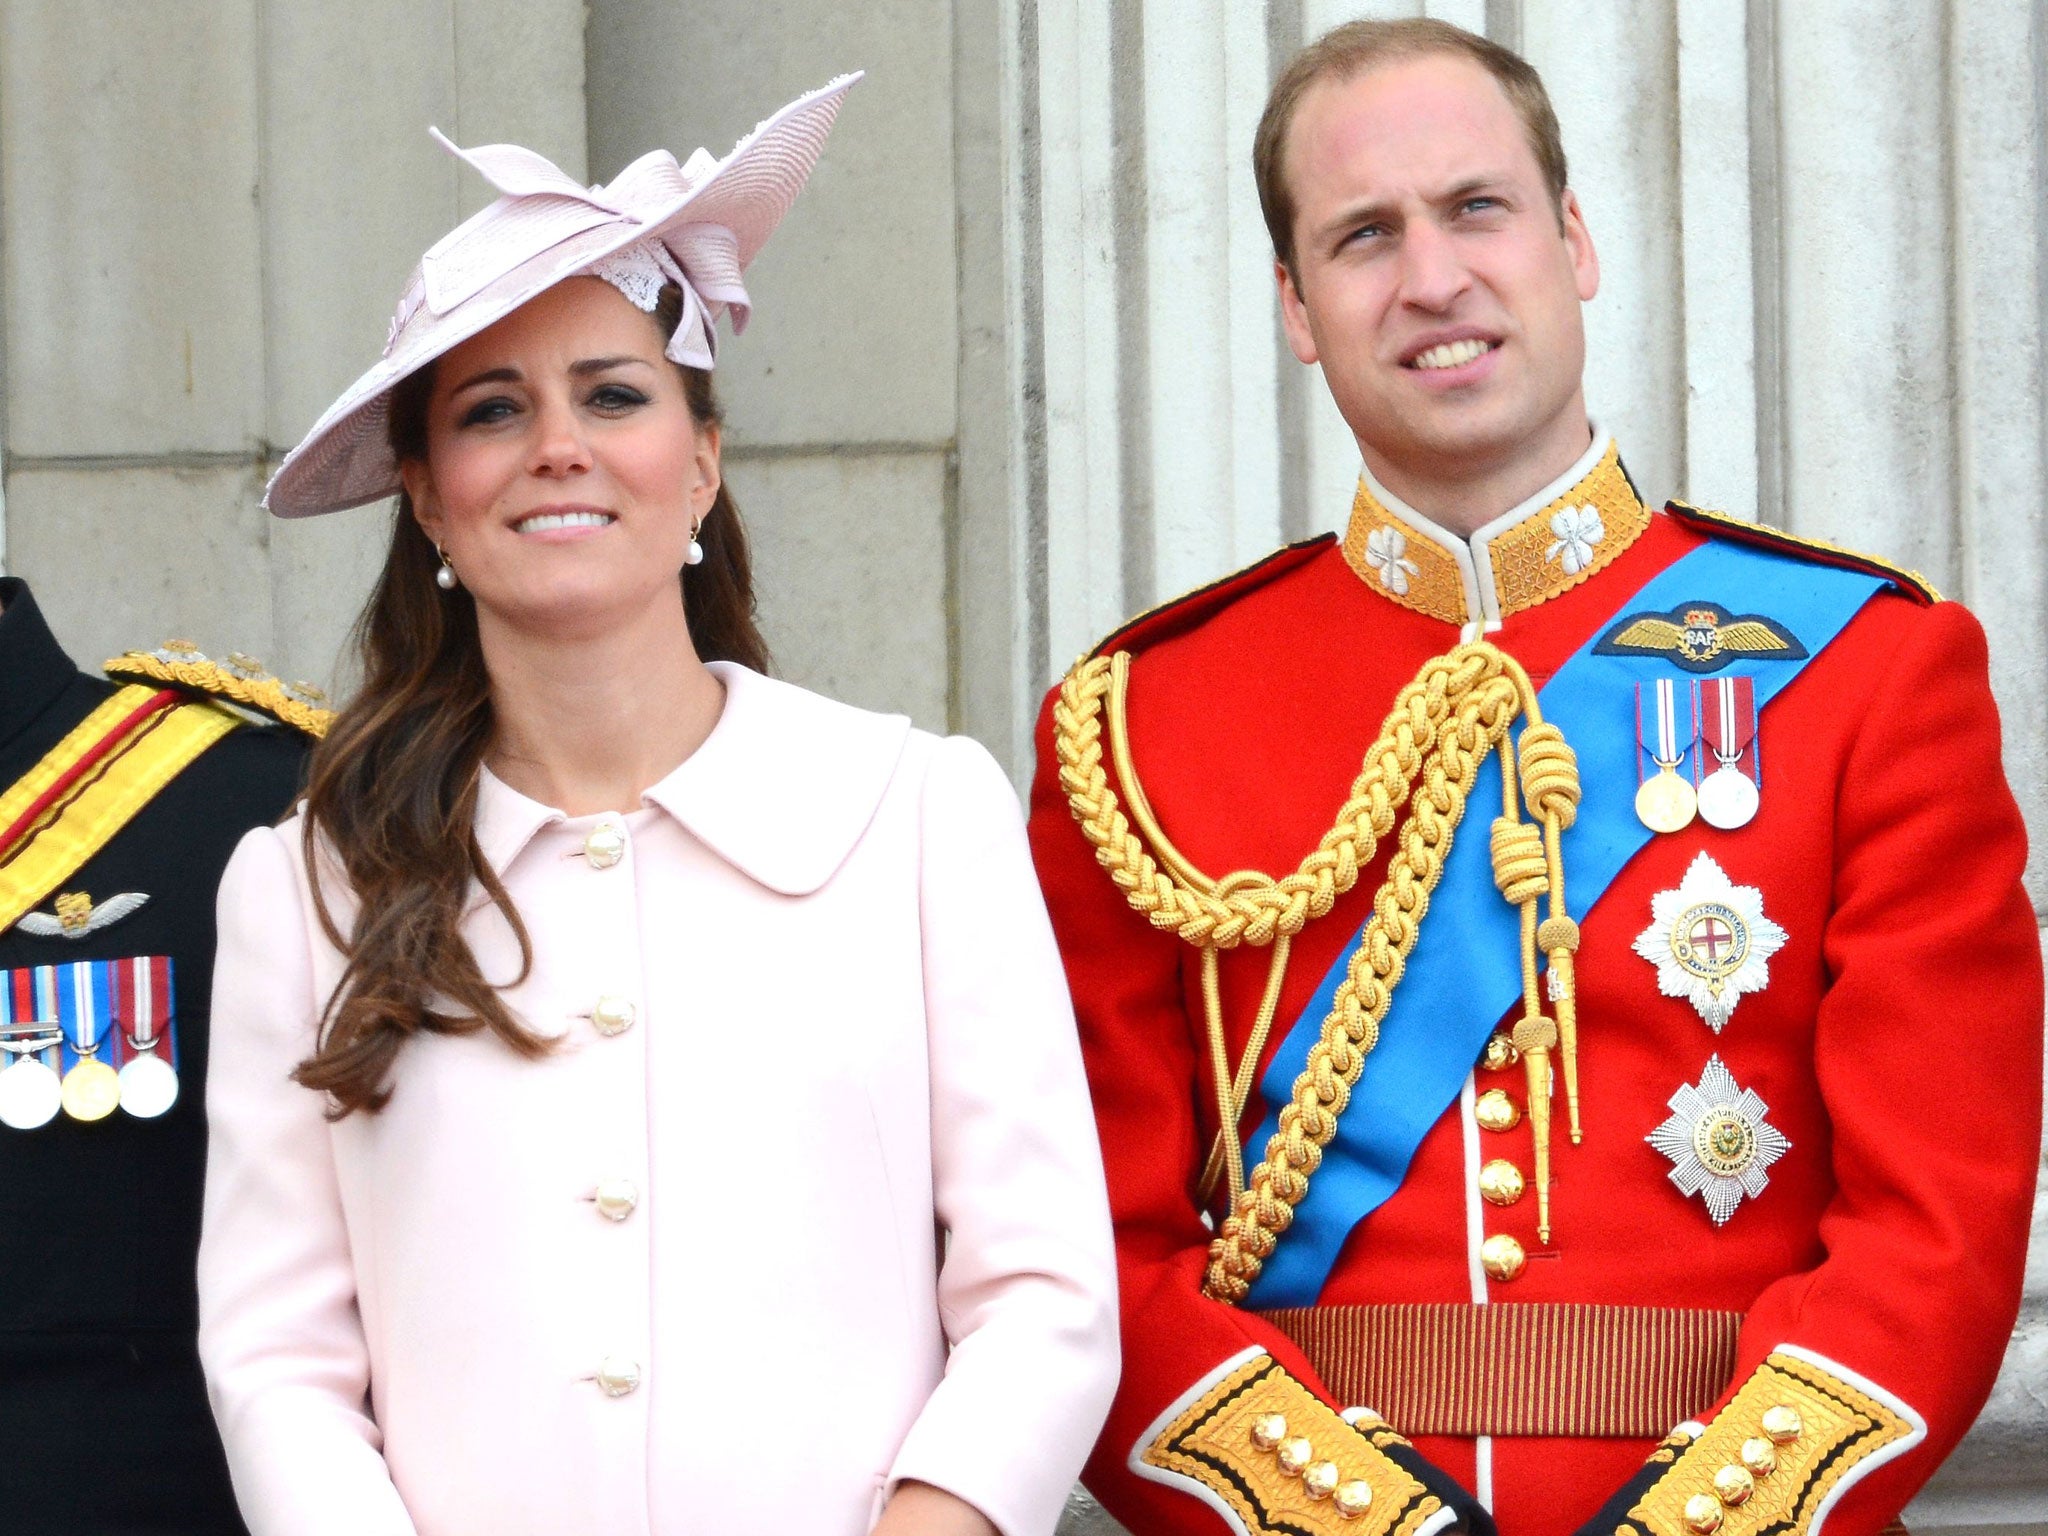 Kate and Will may be paying for their own furnishings, but can’t the Queen cut her costs?